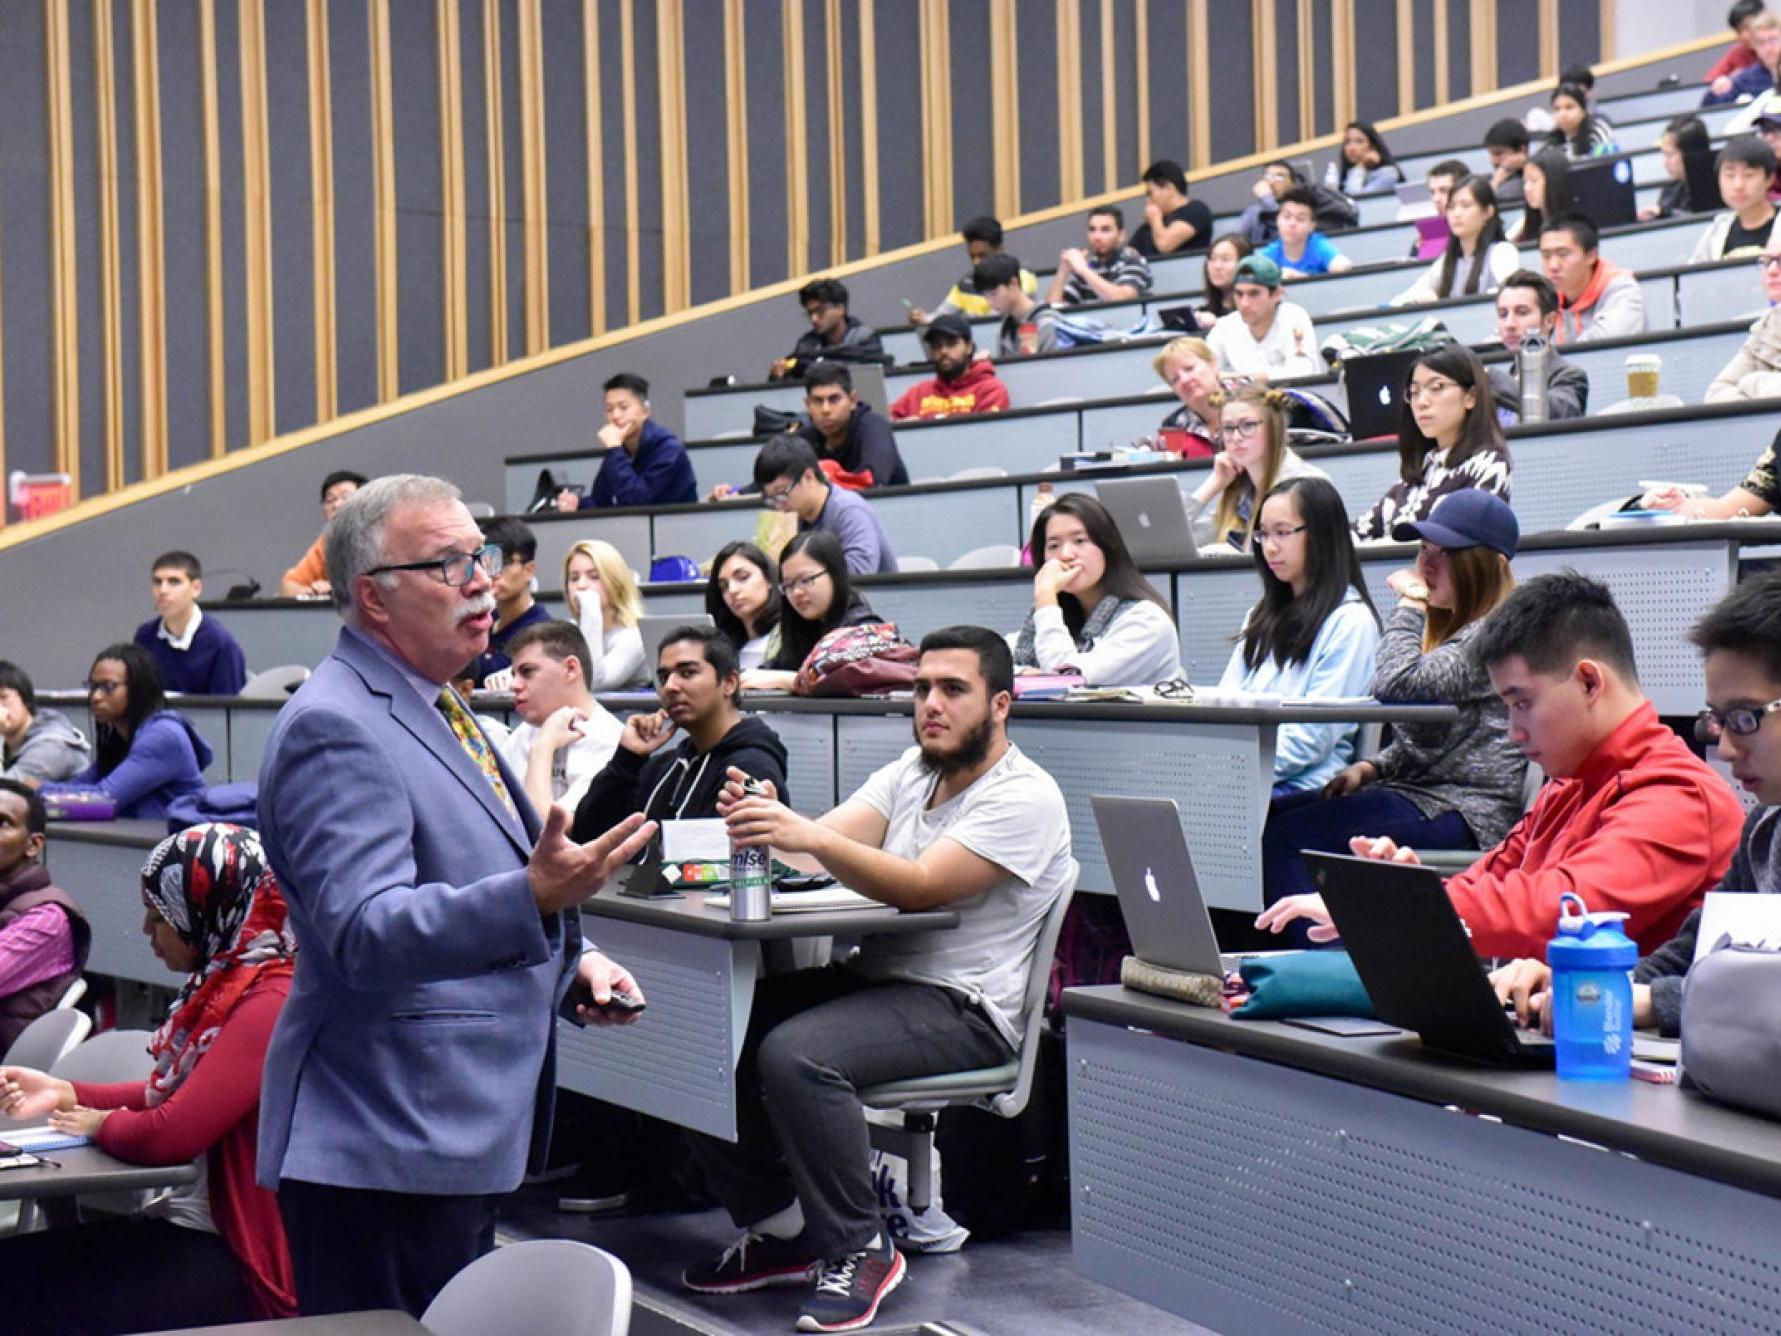 U of T Scarborough students participate in a strategic management lecture.